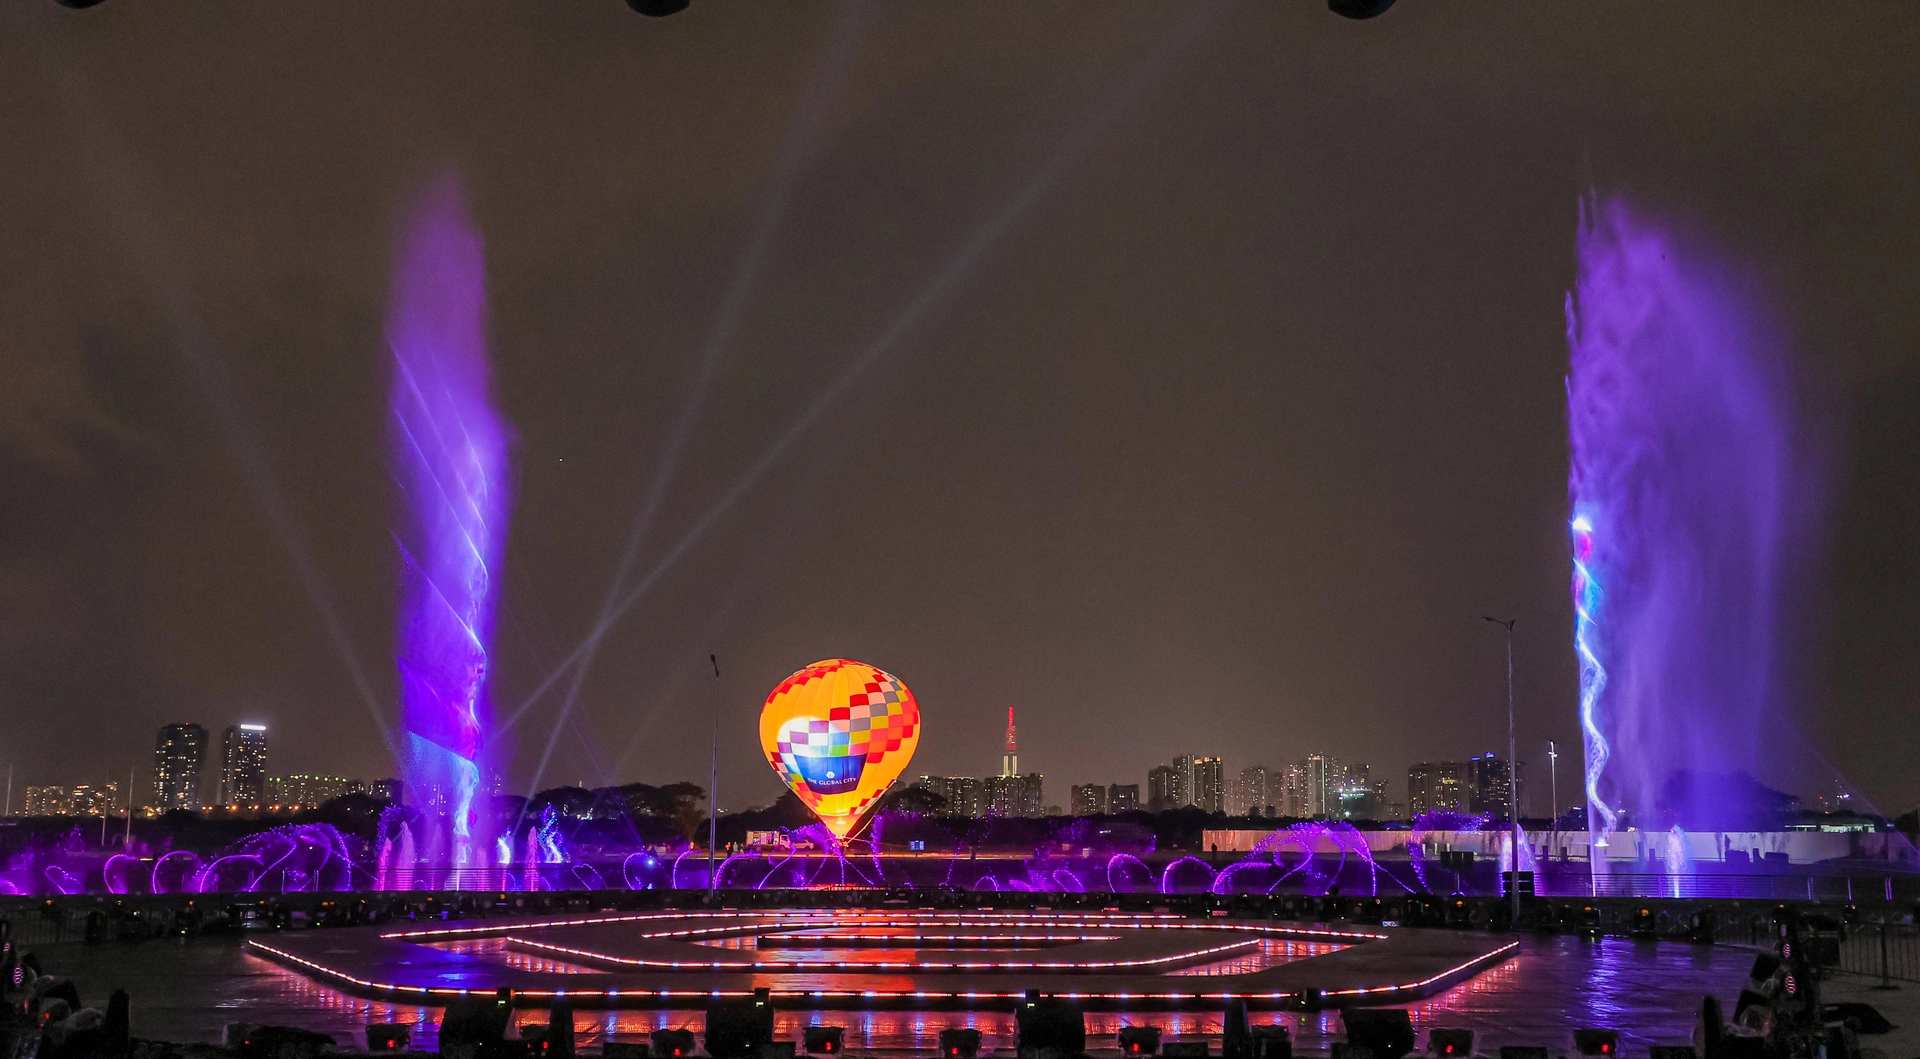 Ho Chi Minh City- Masterise Homes announced the largest water music area in Southeast Asia at The Global City